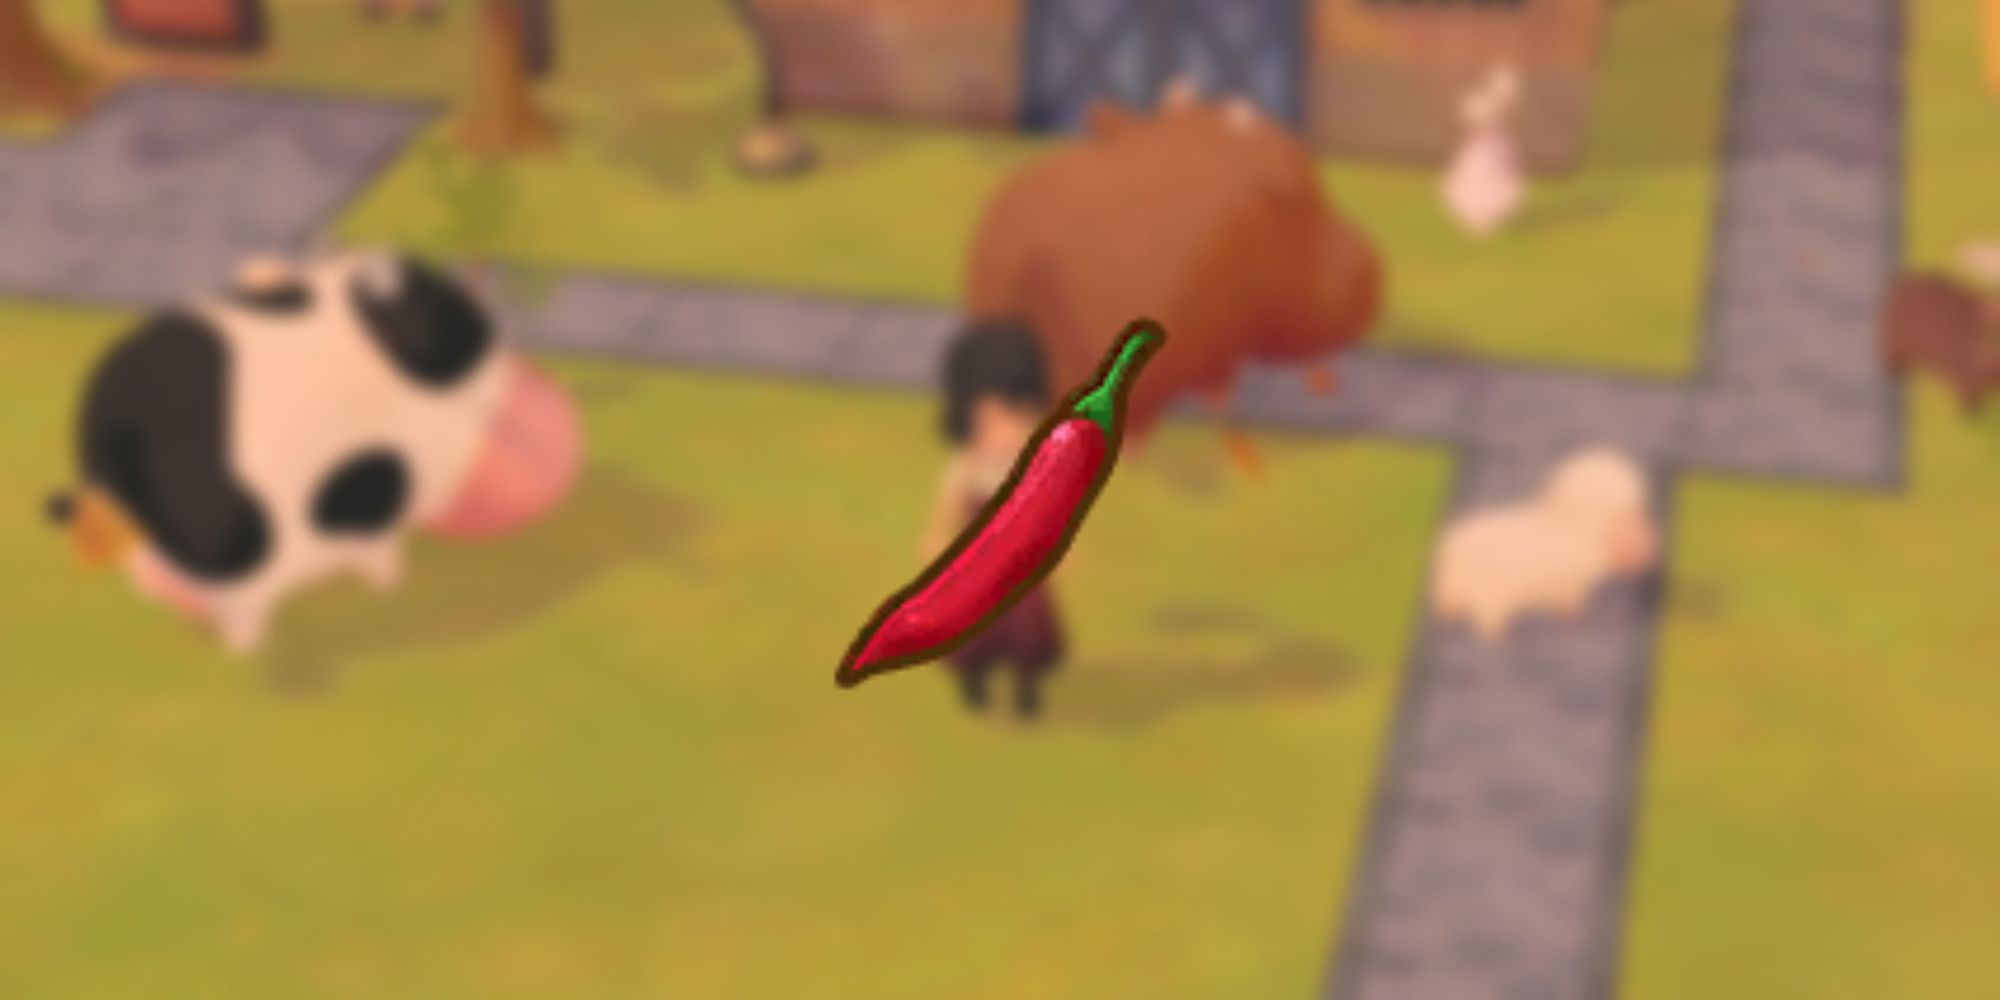 Chili Pepper icon as it would be seen in players inventory over blurred background of player and cows in game